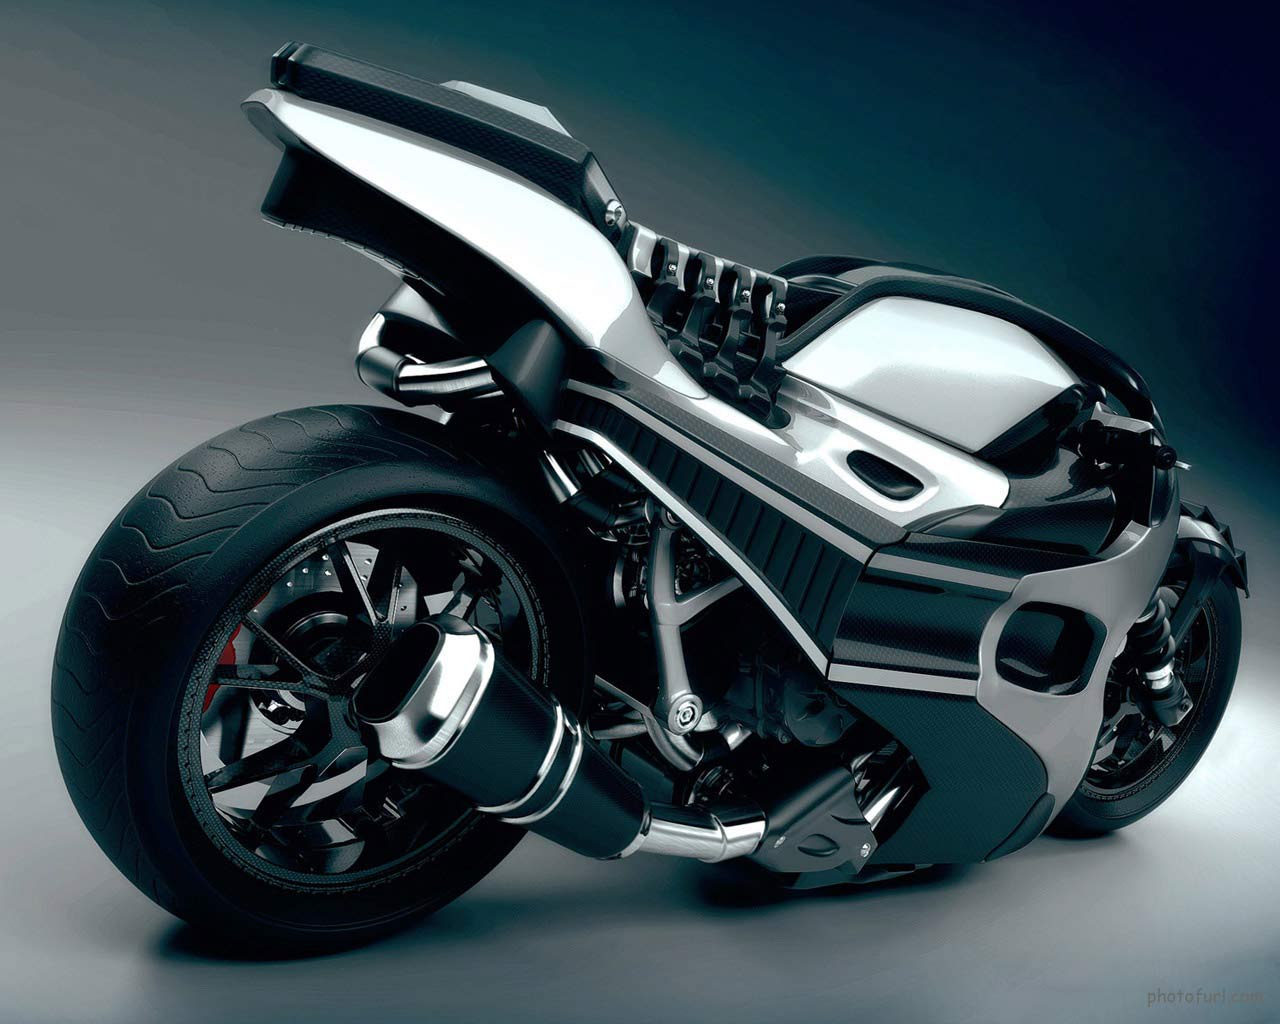 Cool Motorcycles Wallpaper 6905 Hd Wallpapers in Bikes   Imagescicom